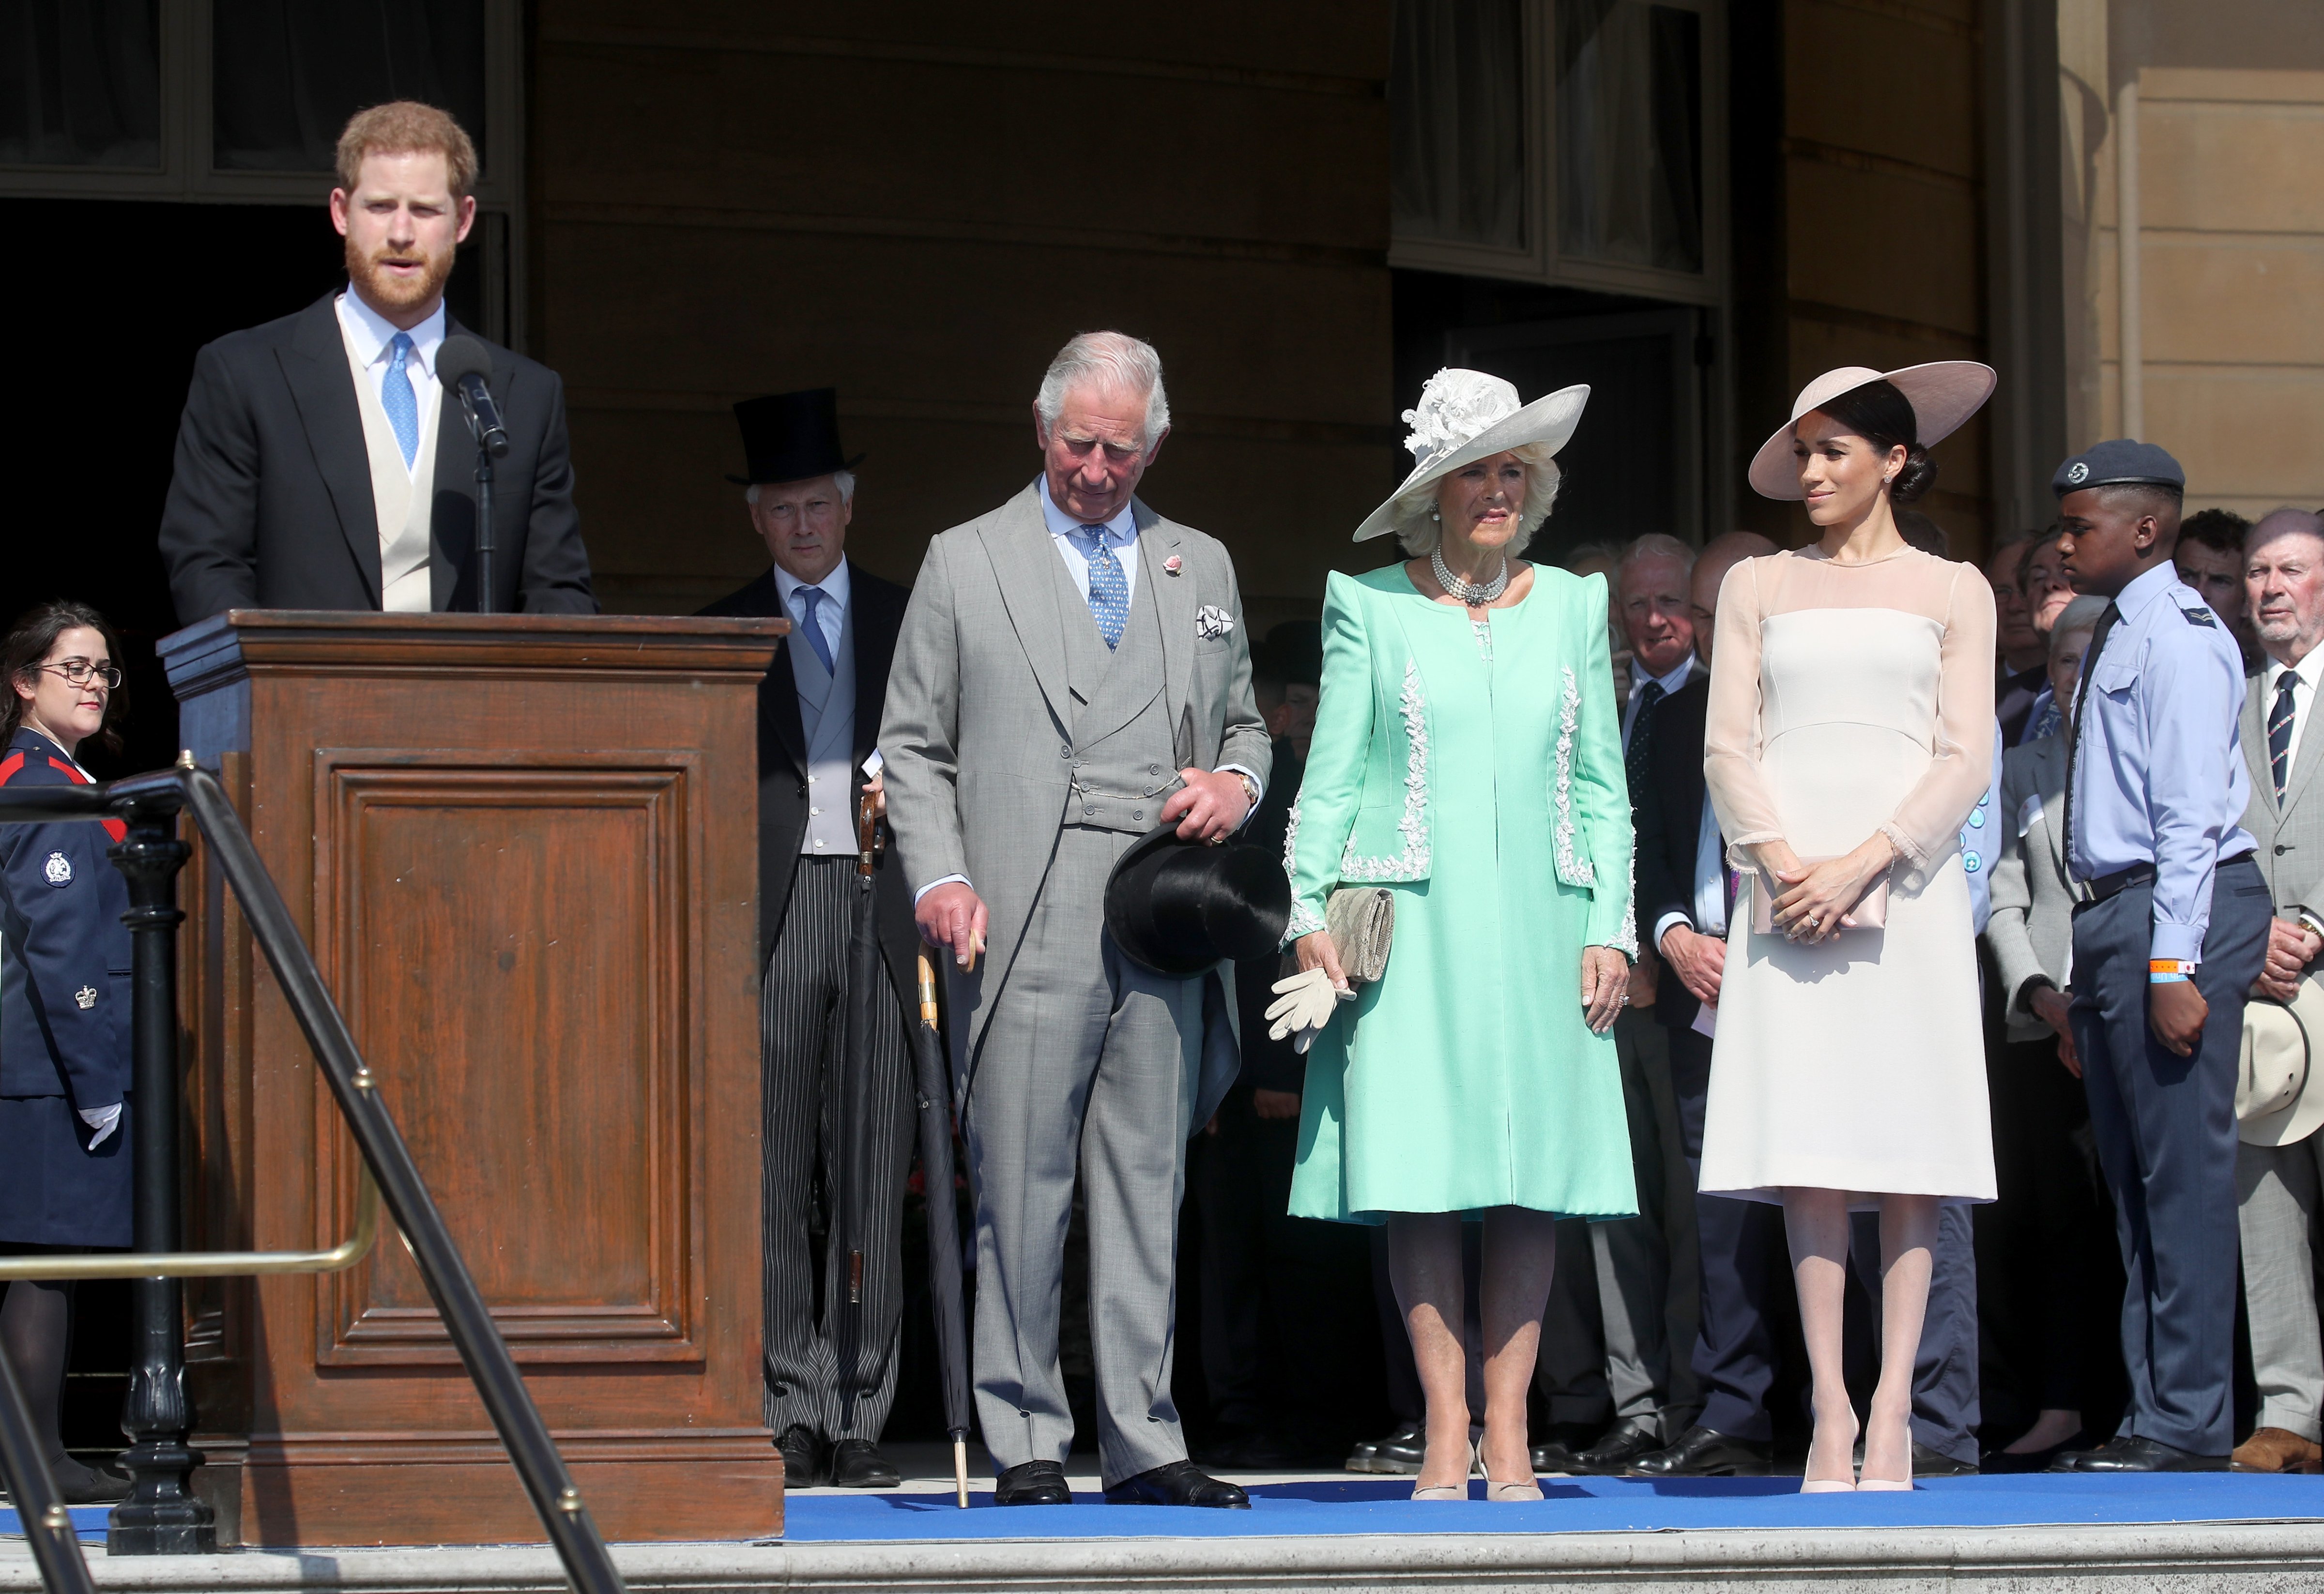 Prince Harry, Duke of Sussex gives a speech next to Prince Charles, Prince of Wales, Camilla, Duchess of Cornwall and Meghan, Duchess of Sussex as they attend The Prince of Wales' 70th Birthday Patronage Celebration held at Buckingham Palace on May 22, 2018 in London, England. (Chris Jackson—Chris Jackson/Getty Images)